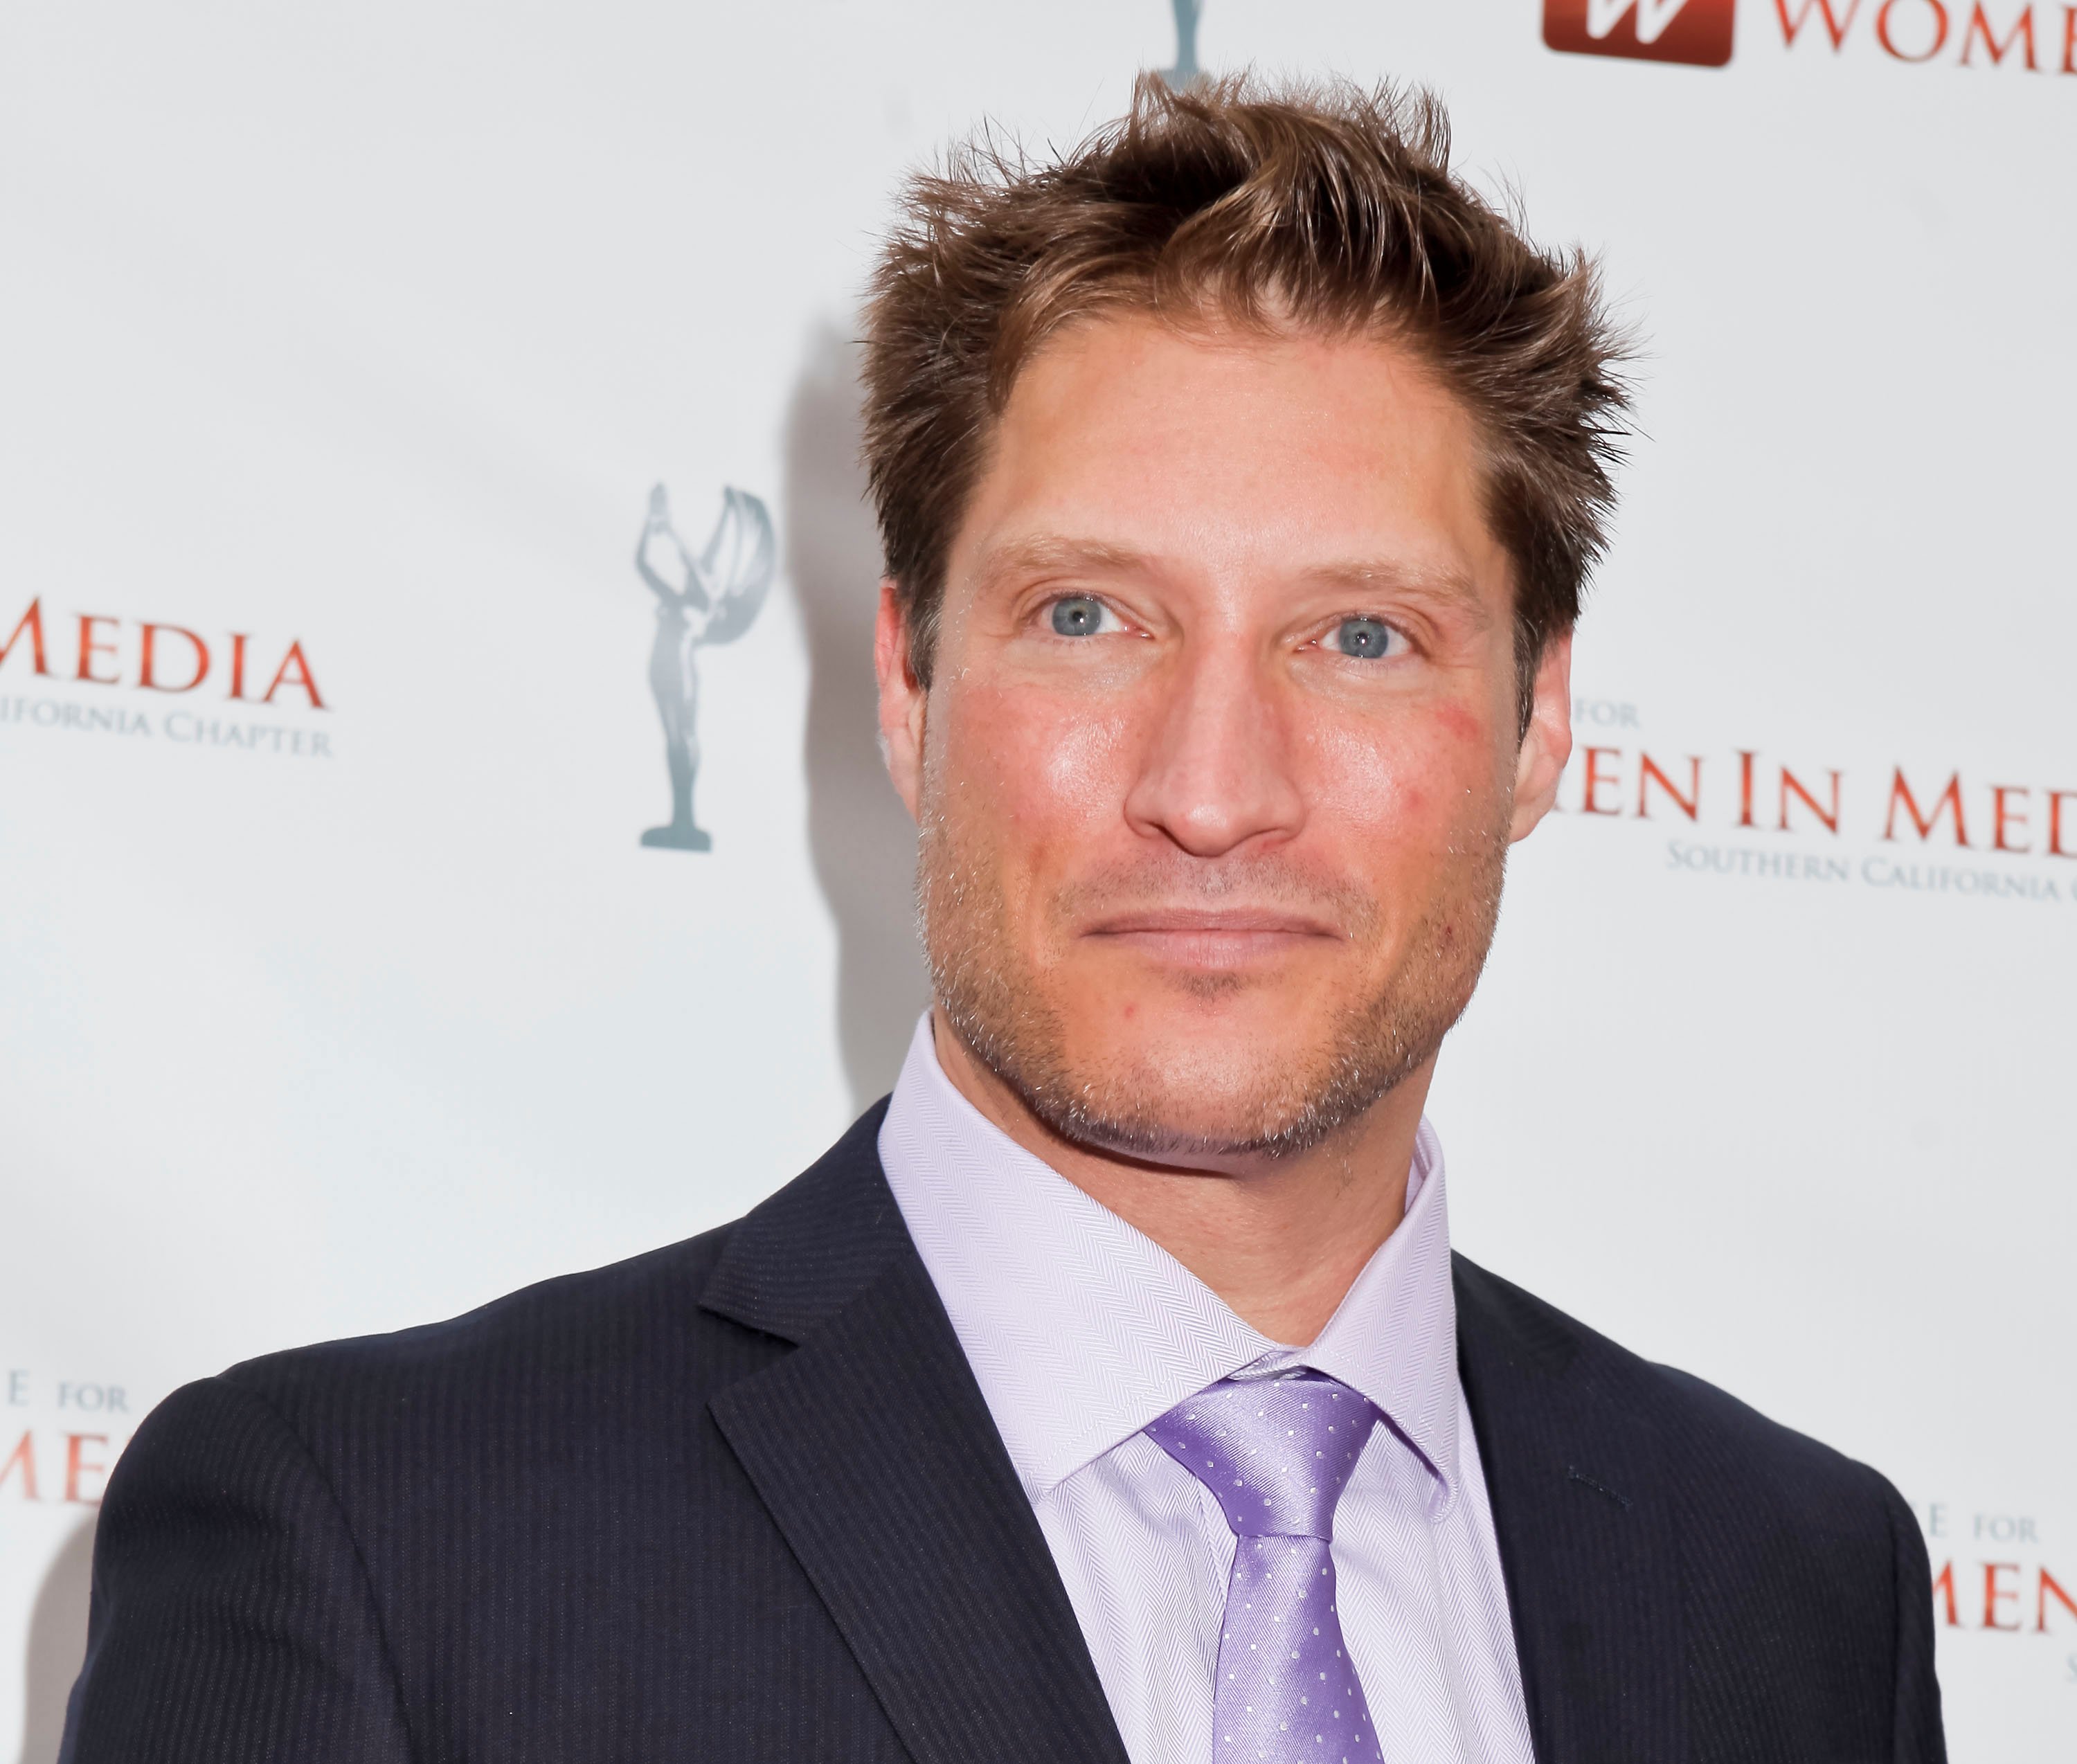 'The Bold and the Beautiful' actor Sean Kanan wearing a black suit, white shirt, and lavender tie.